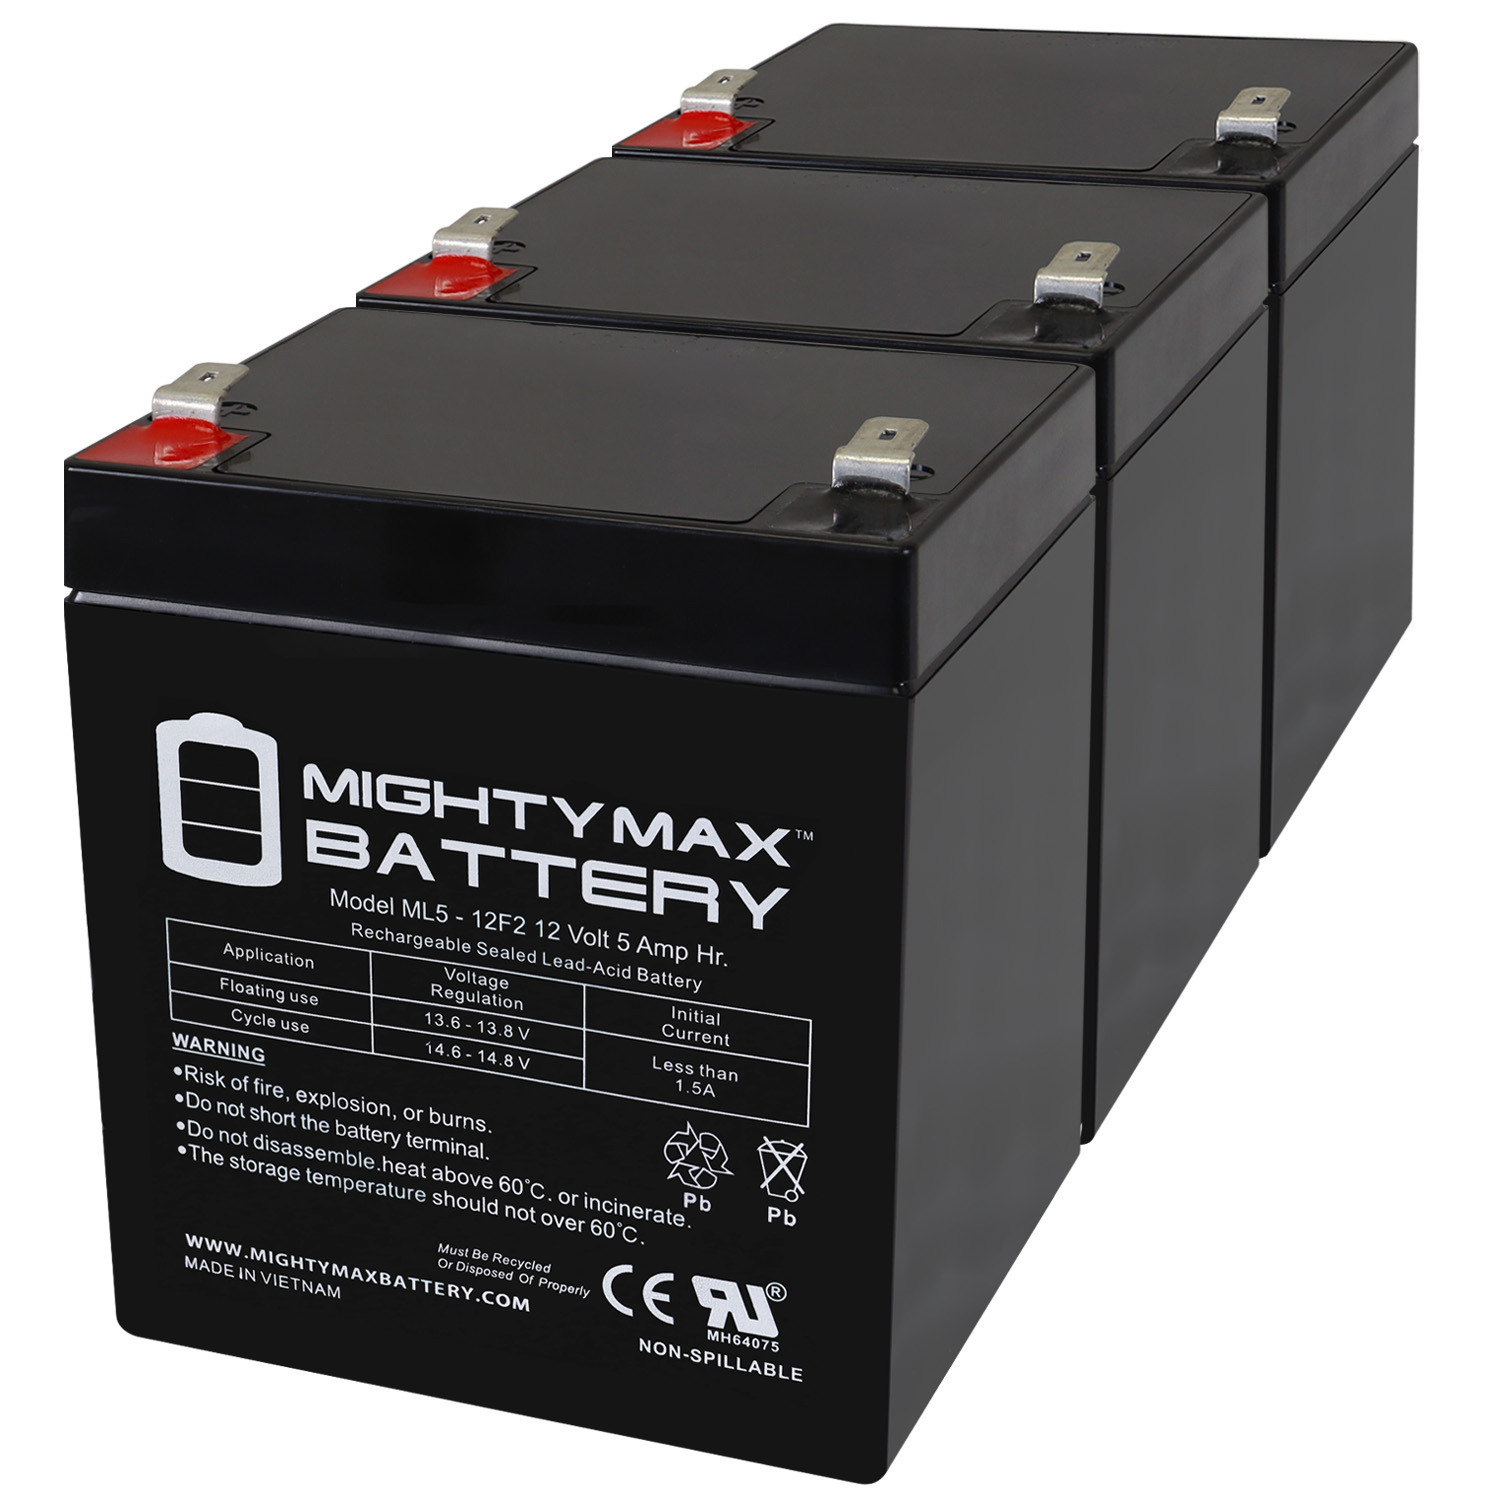 12V 5Ah F2 SLA Replacement Battery for Roketa ES-47 E-Scooter - 3 Pack